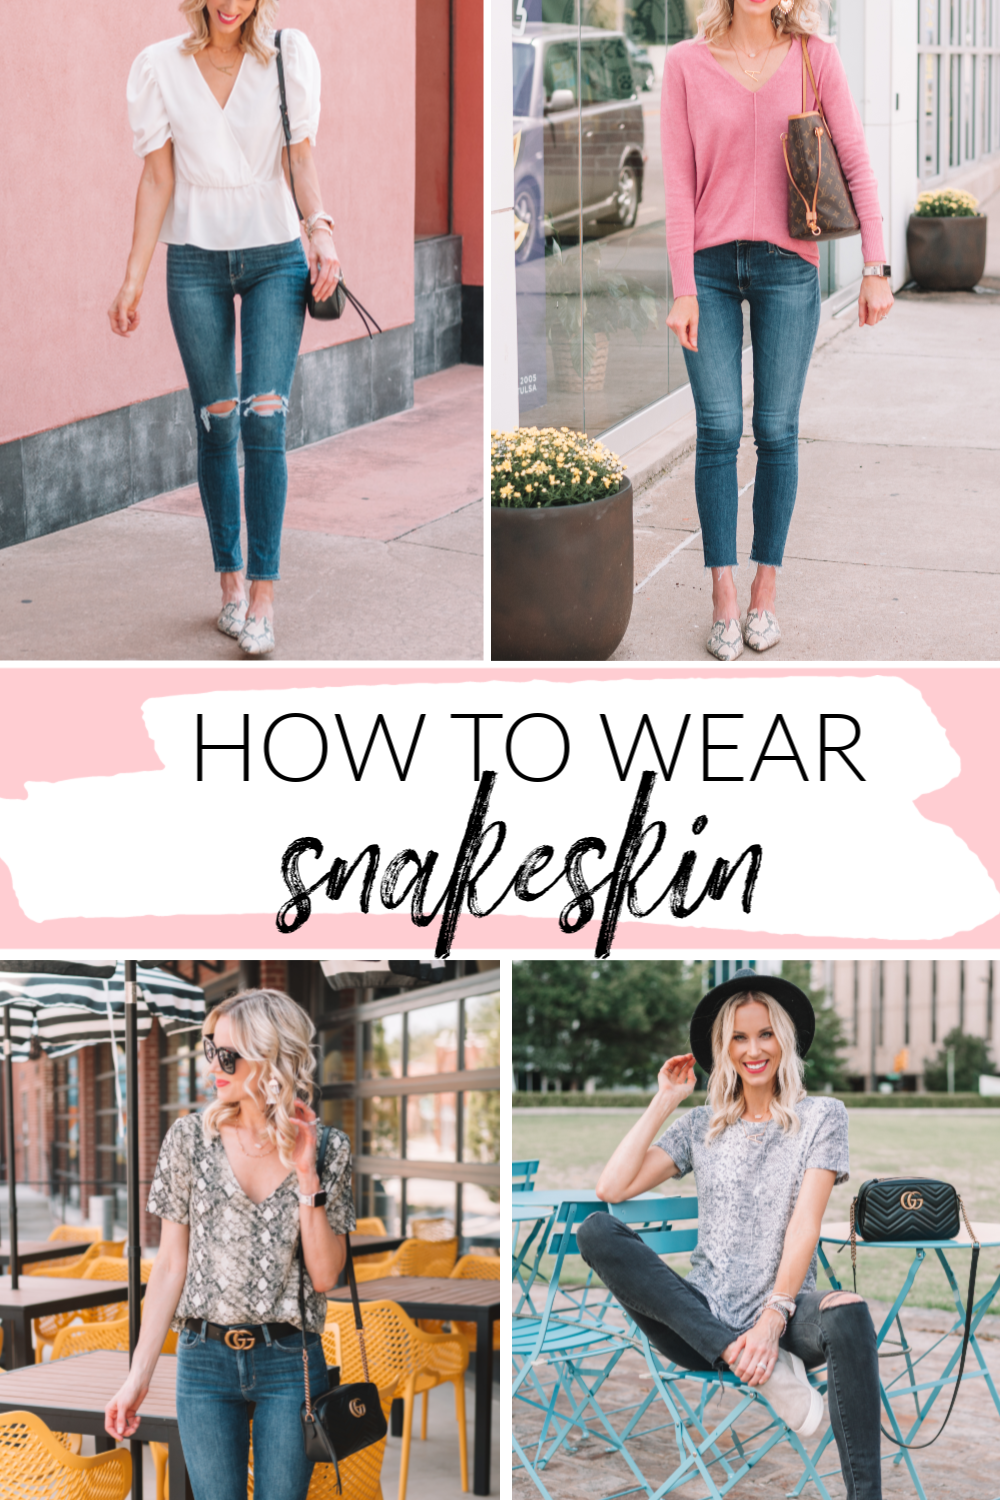 snakeskin pumps outfit